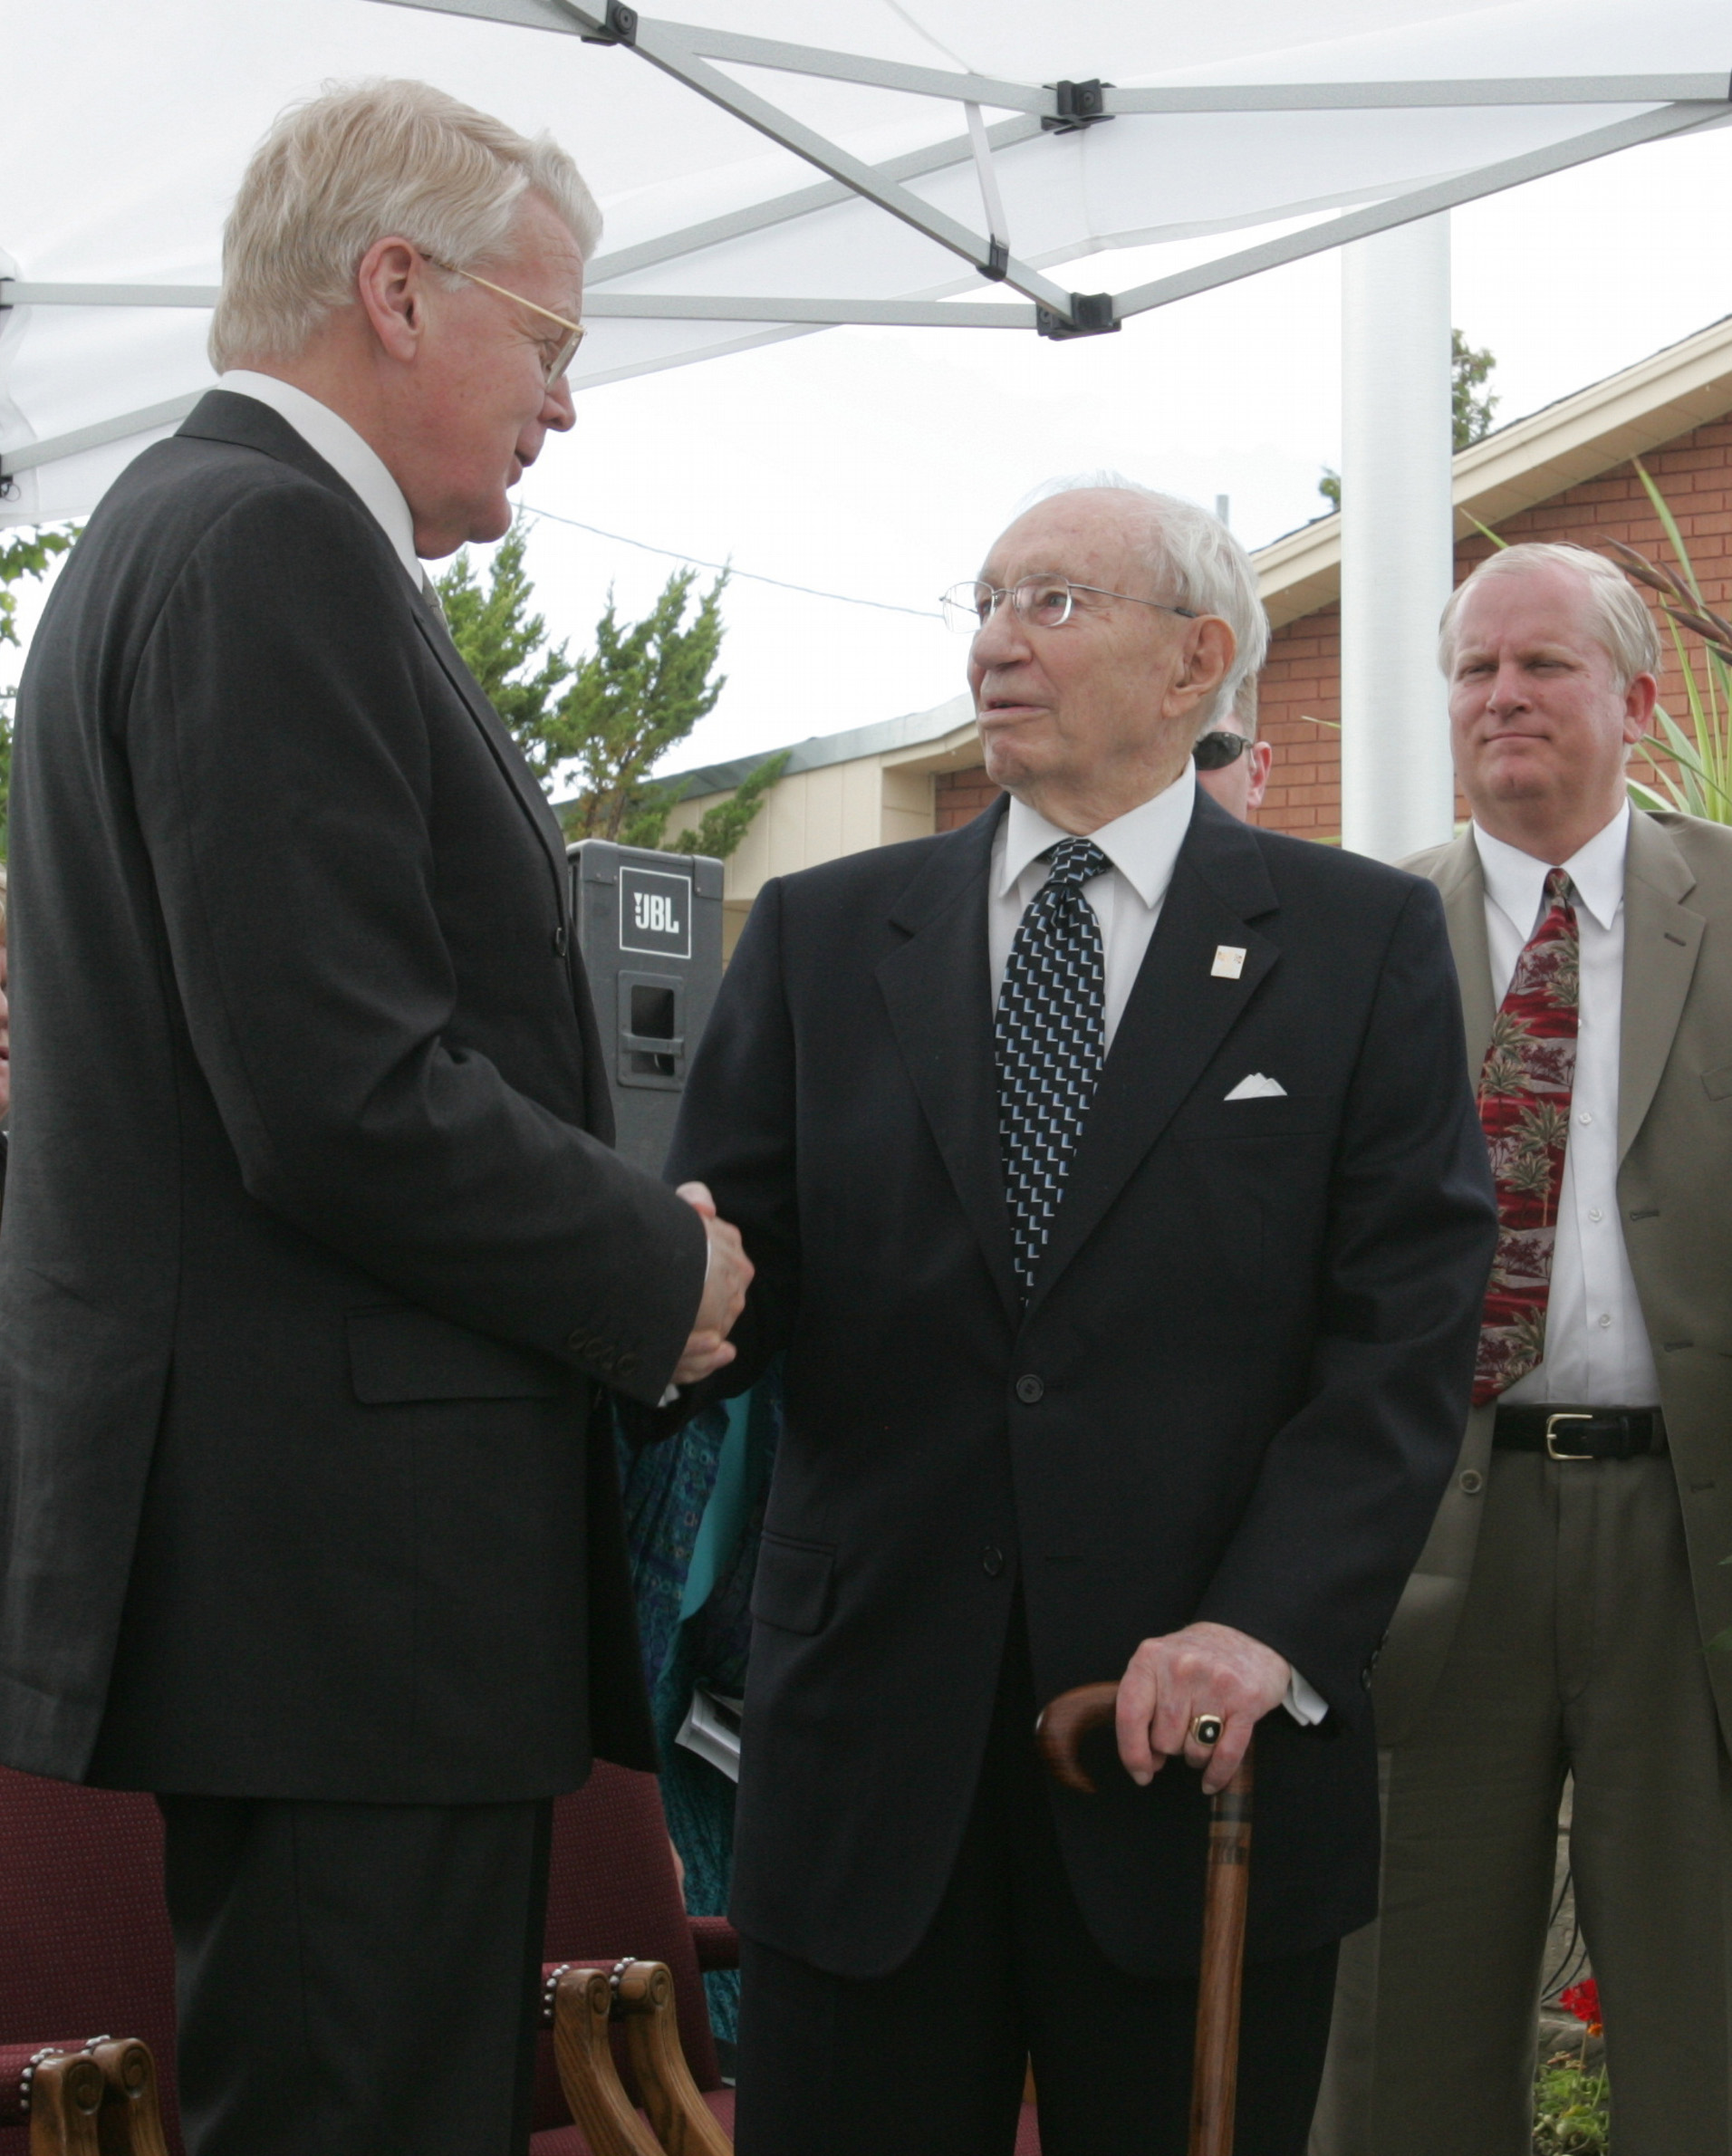 Michael L. Hutchings, secretary of the Mormon Historic Sites Foundation, looks on as Ólafur Ragnar Grímsson, president of Iceland, and Gordon B. Hinckley, president of The Church of Jesus Christ of Latter-day Saints, shake hands. Courtesy of Deseret Morning News